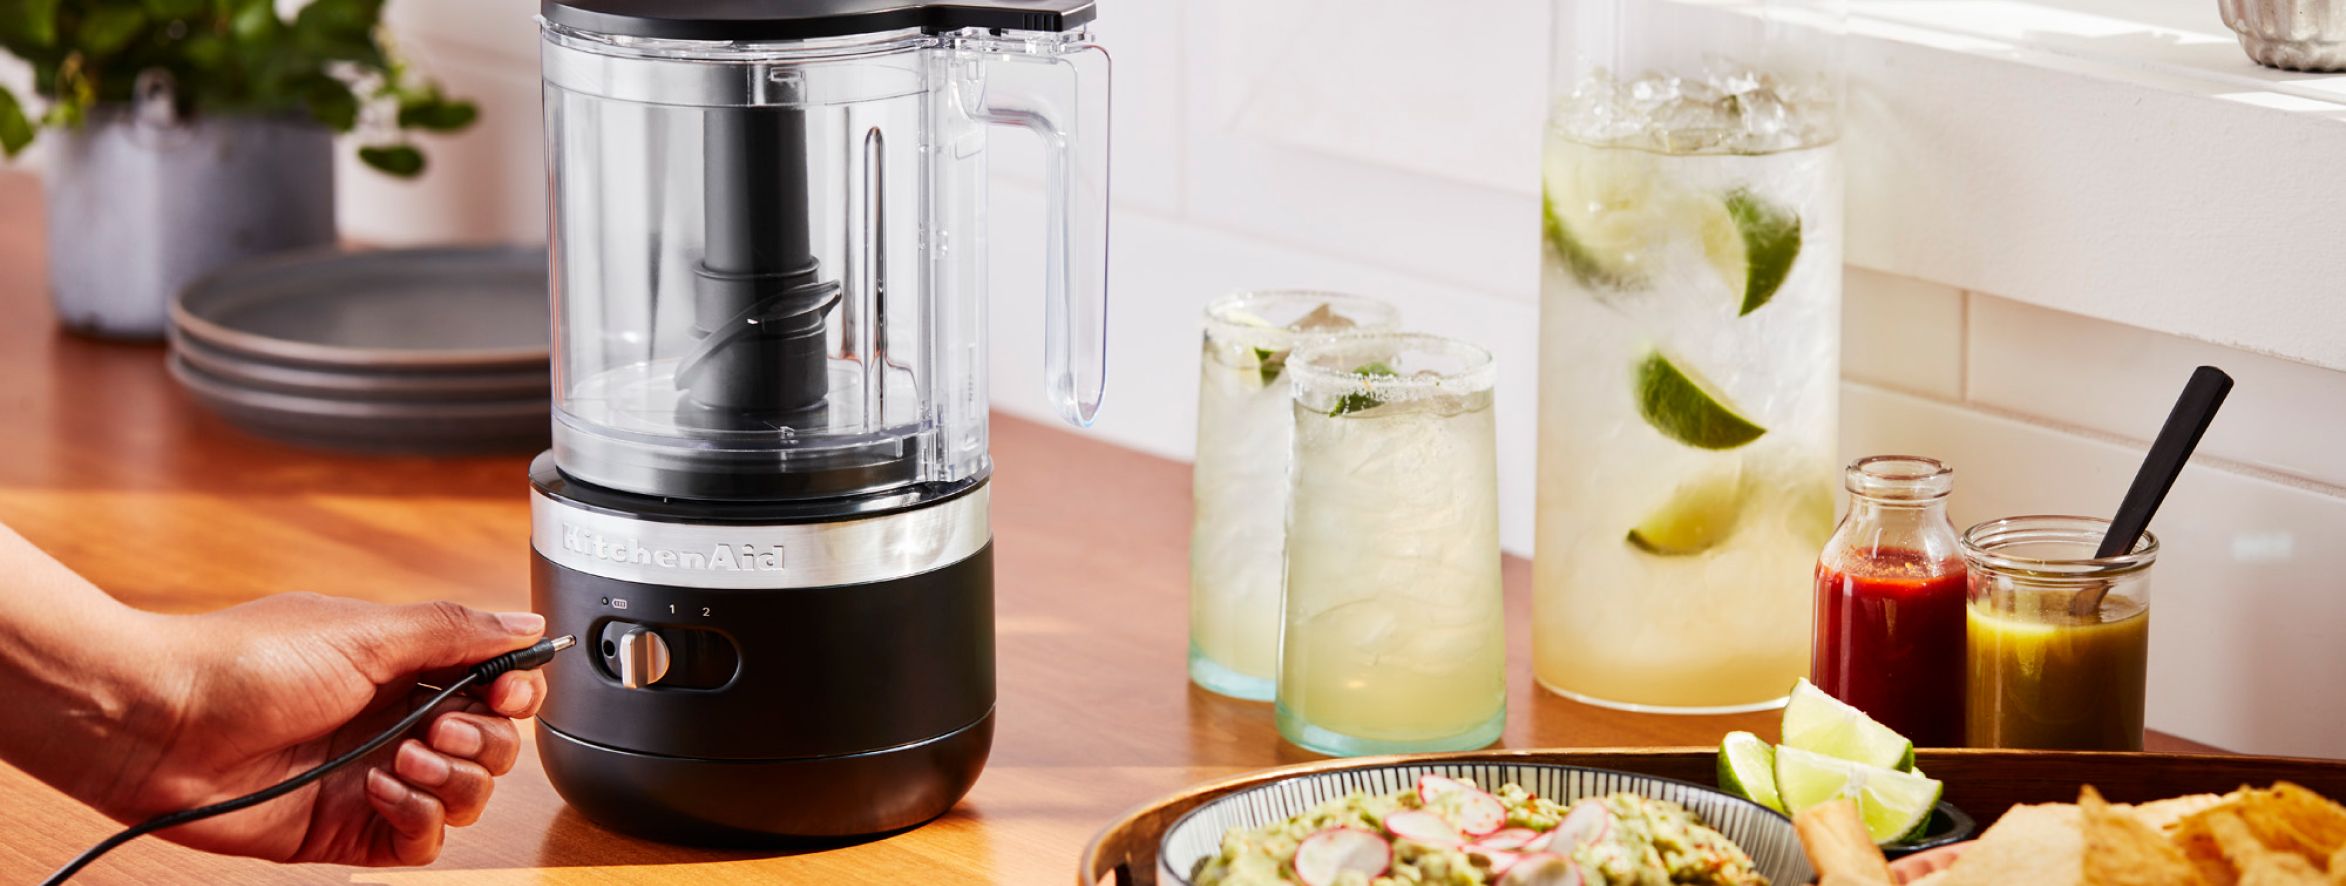 A KitchenAid® rechargeable food chopper in a modern kitchen